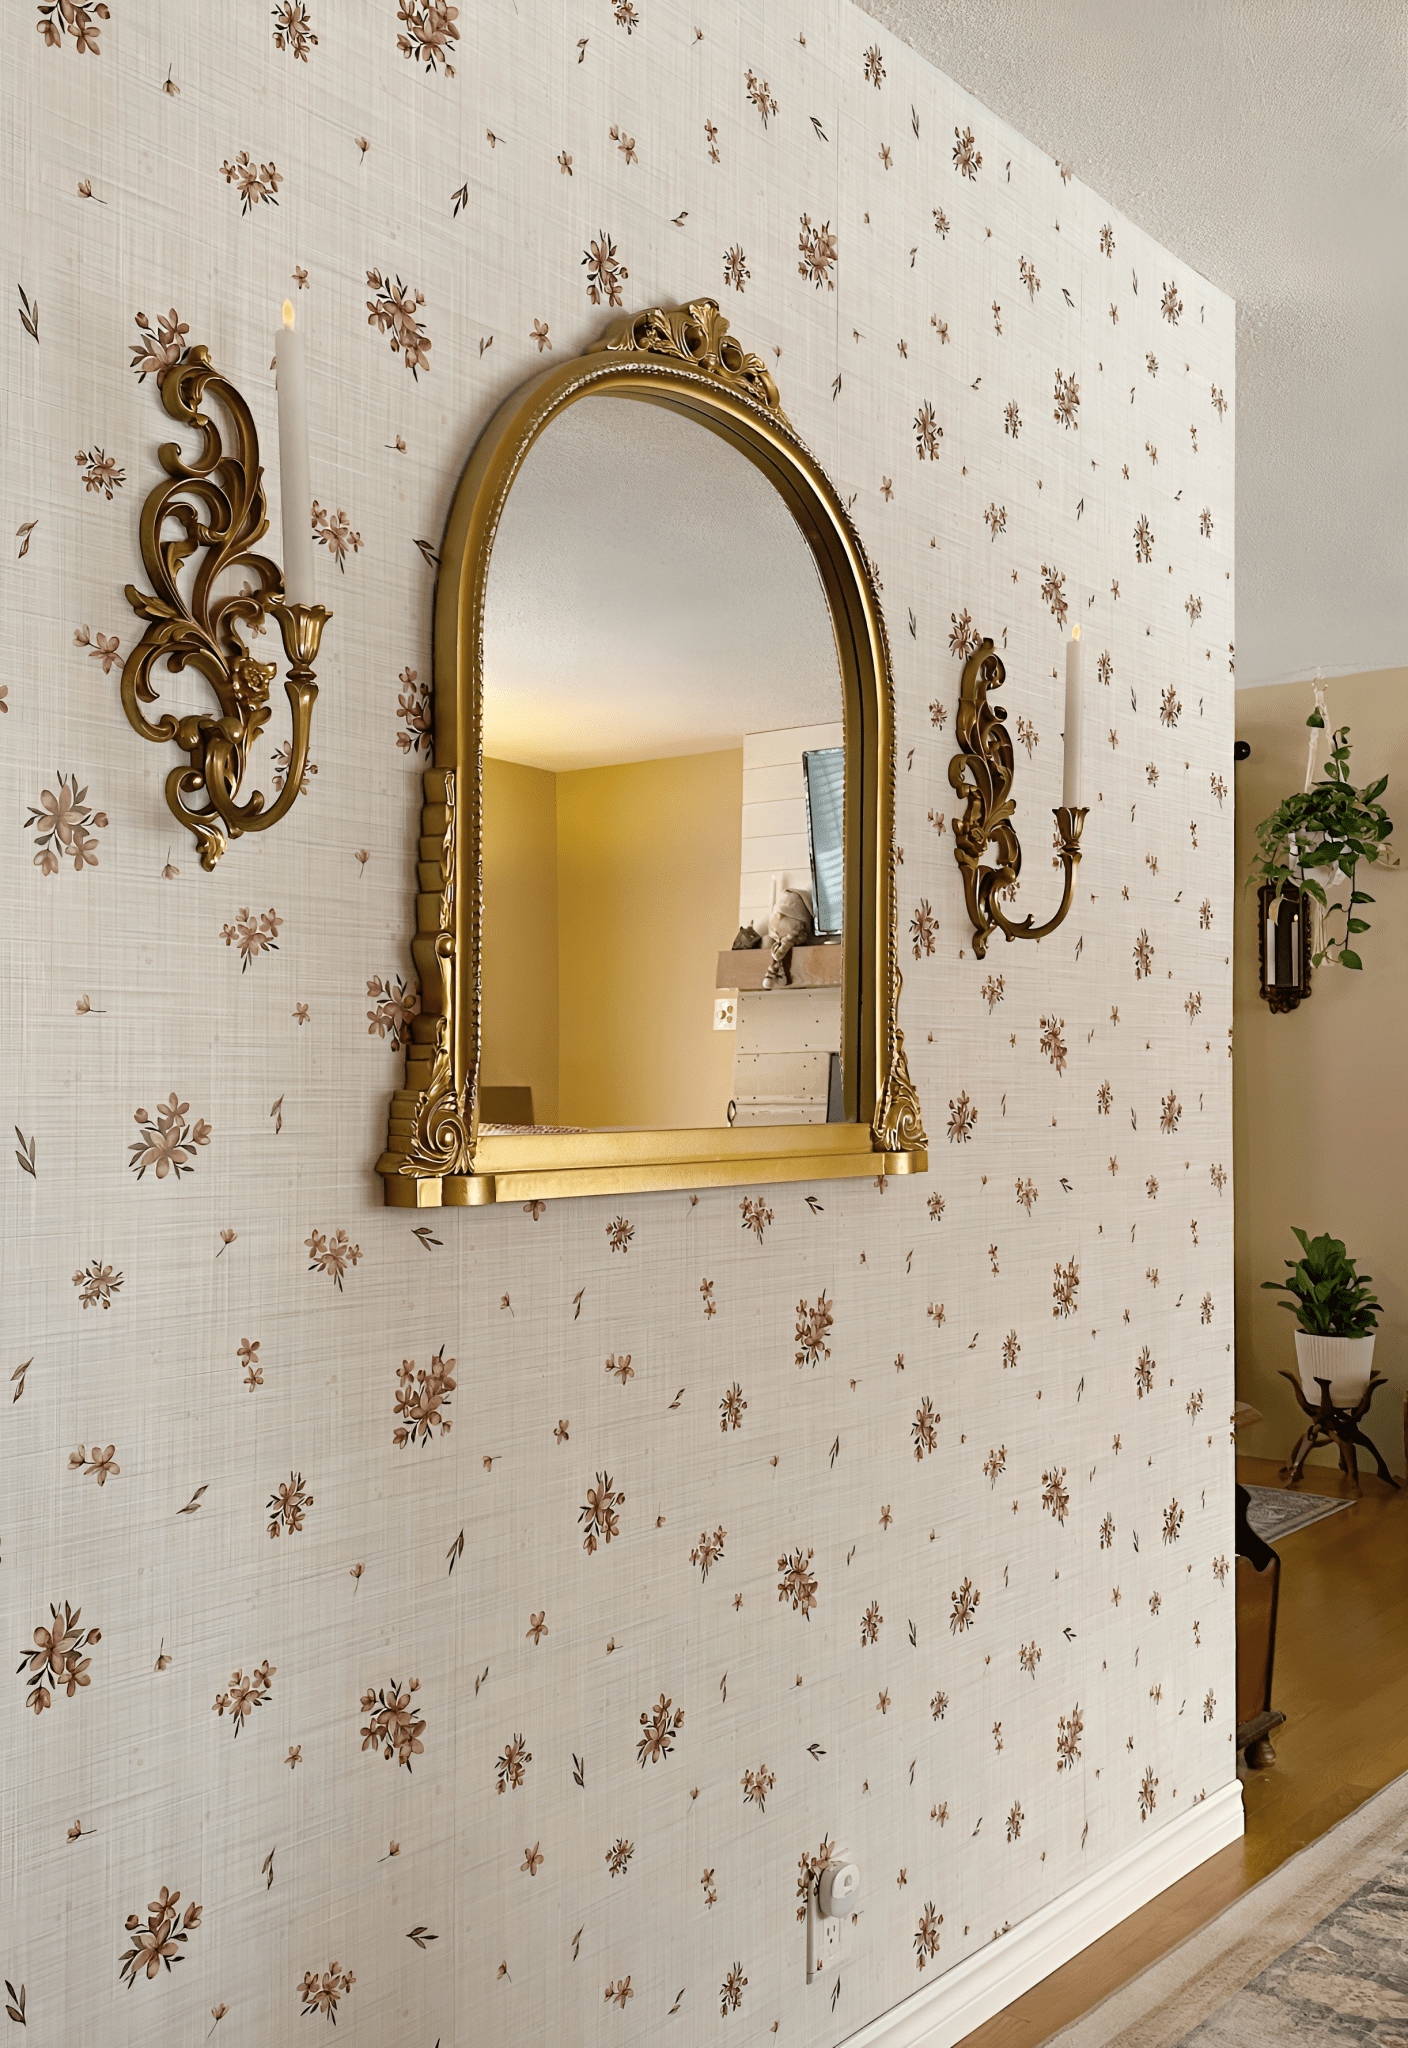 A closer view of the beige floral wallpaper, showing its texture and the gold-framed mirror and sconces on the wall. A light switch is visible on the right.